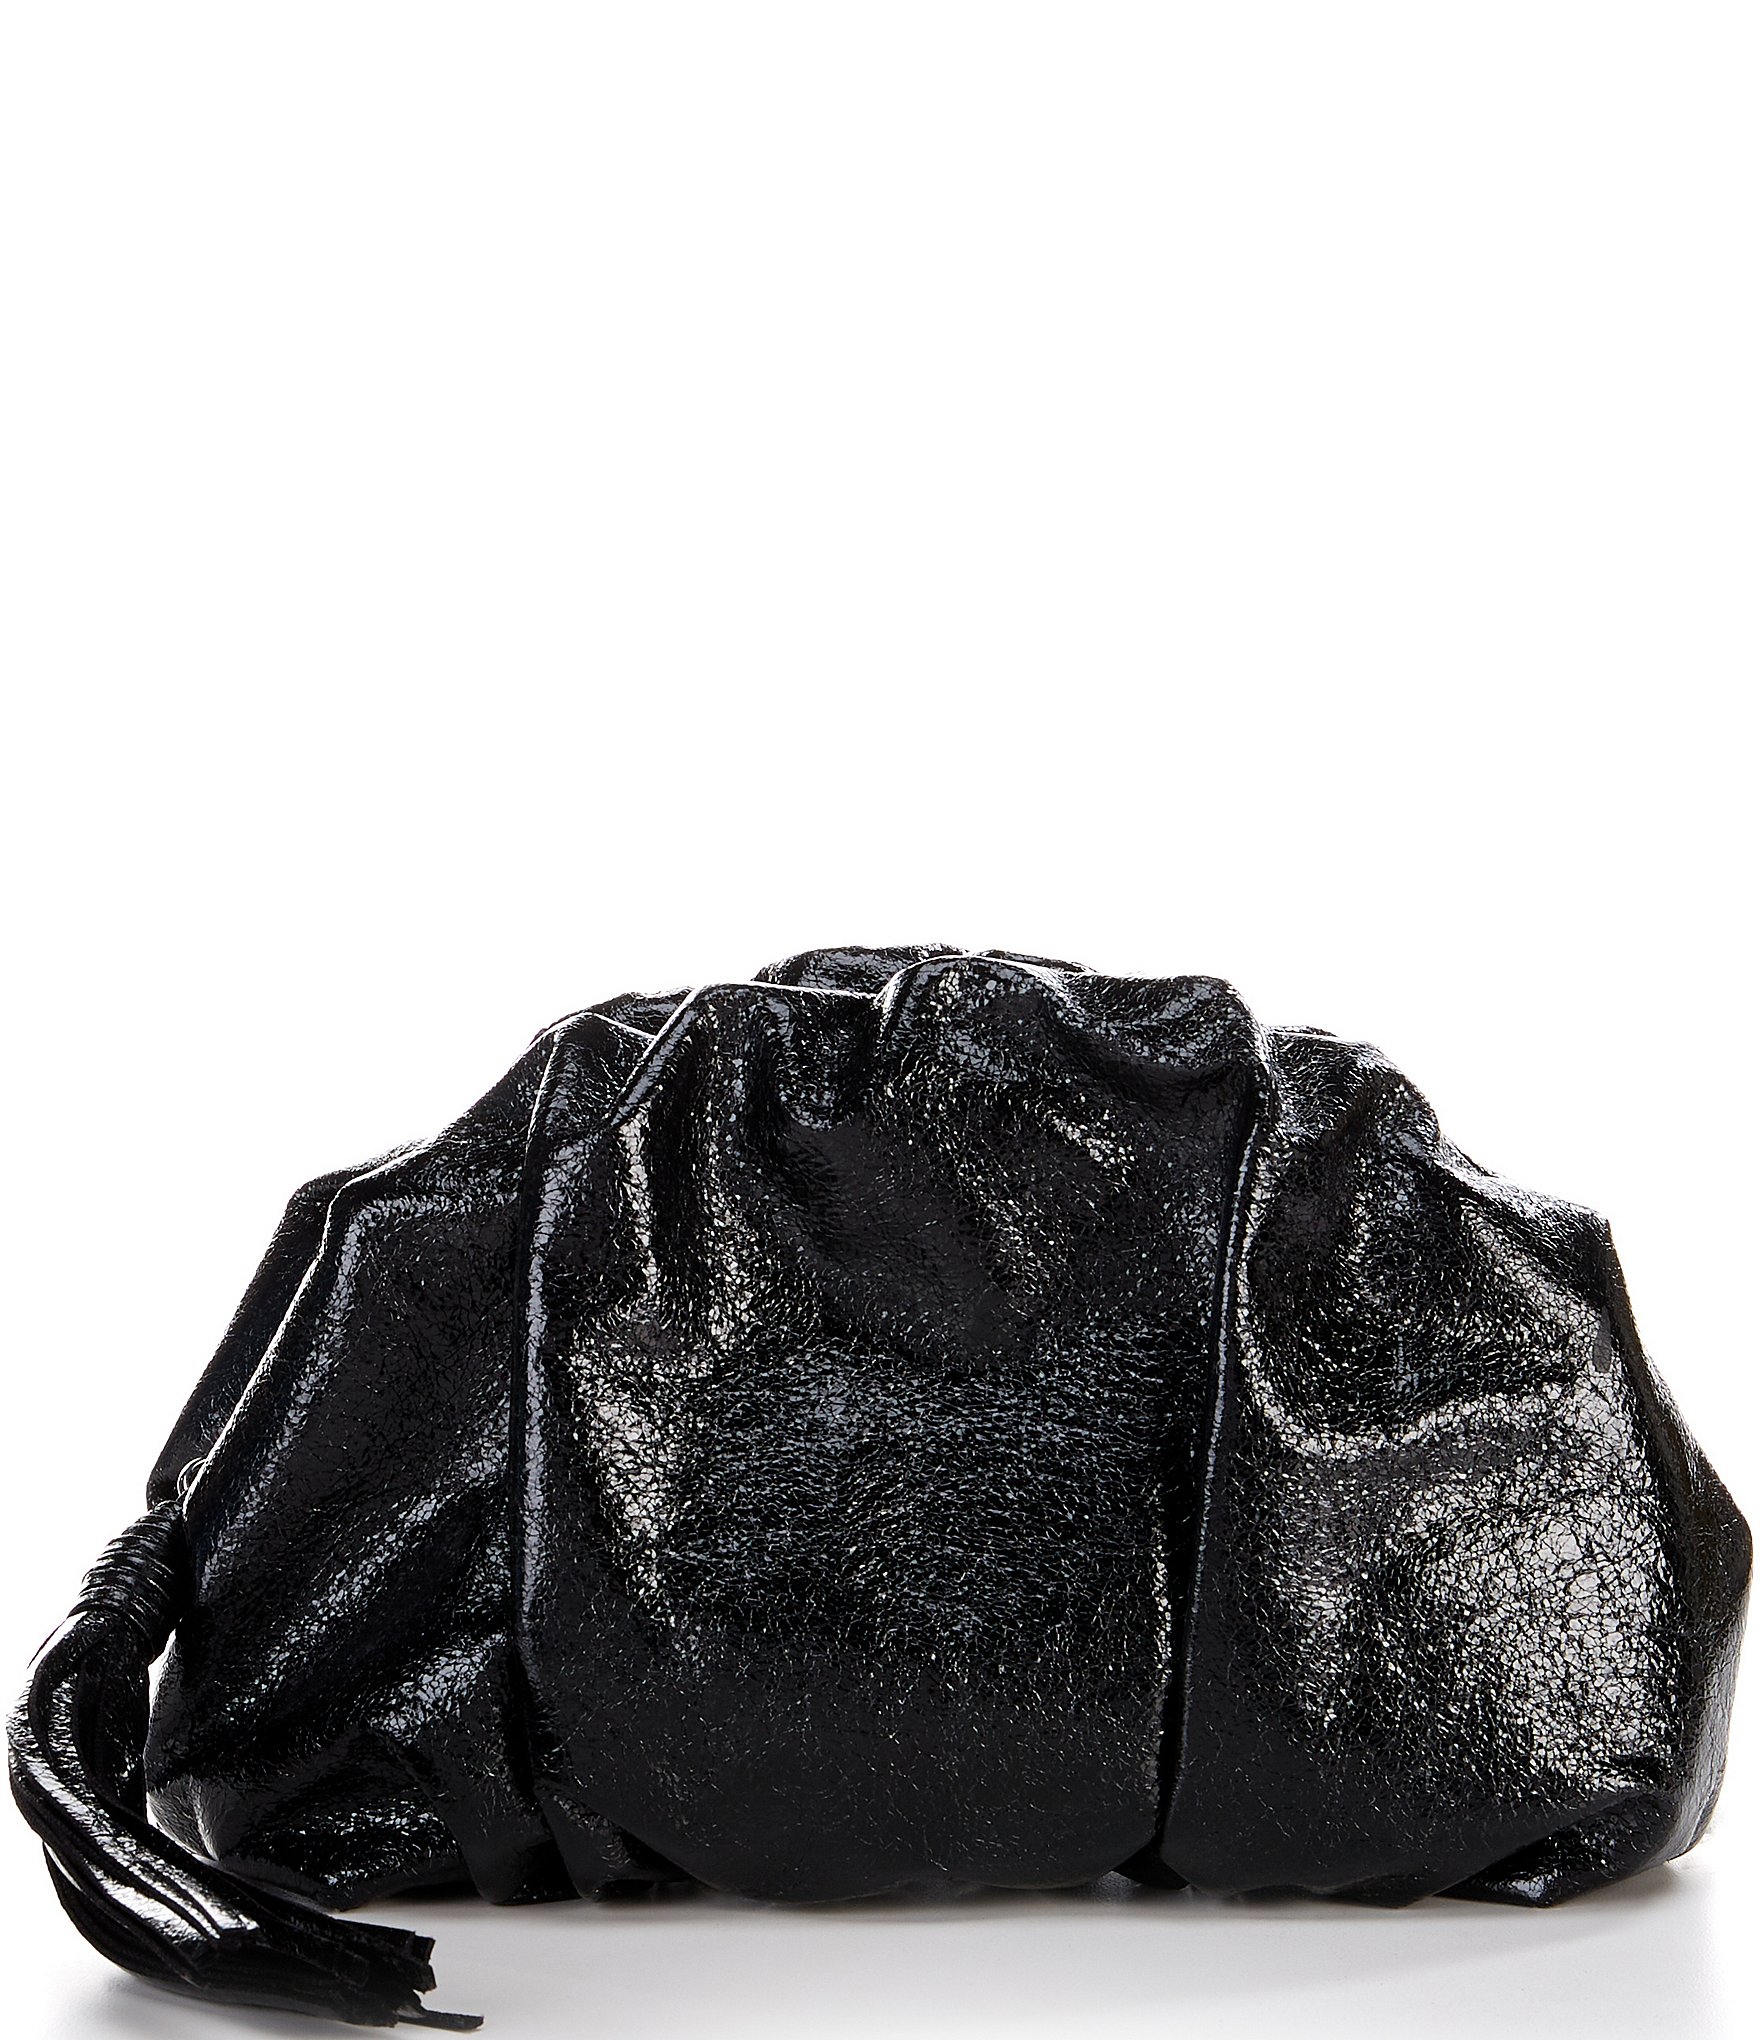 Black Ruched Bag Large Capacity With Coin Purse